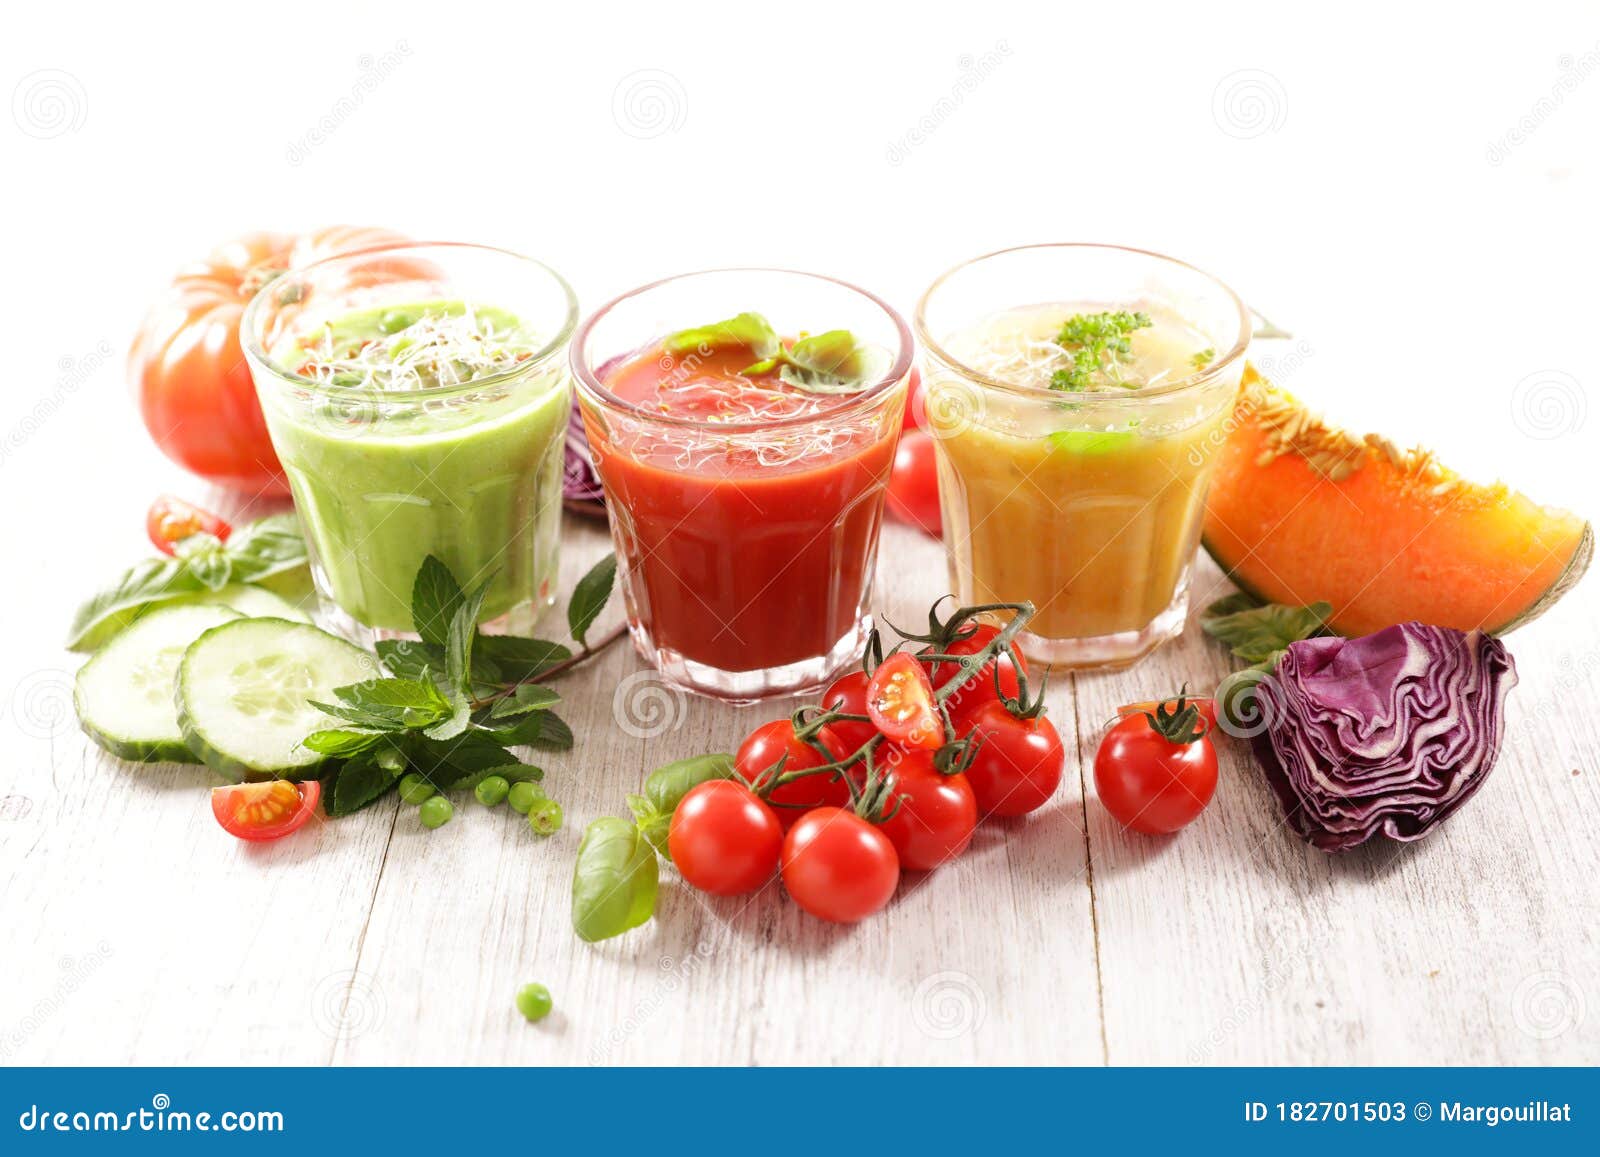 Gazpacho or Vegetable Smoothie Stock Image - Image of assortment ...